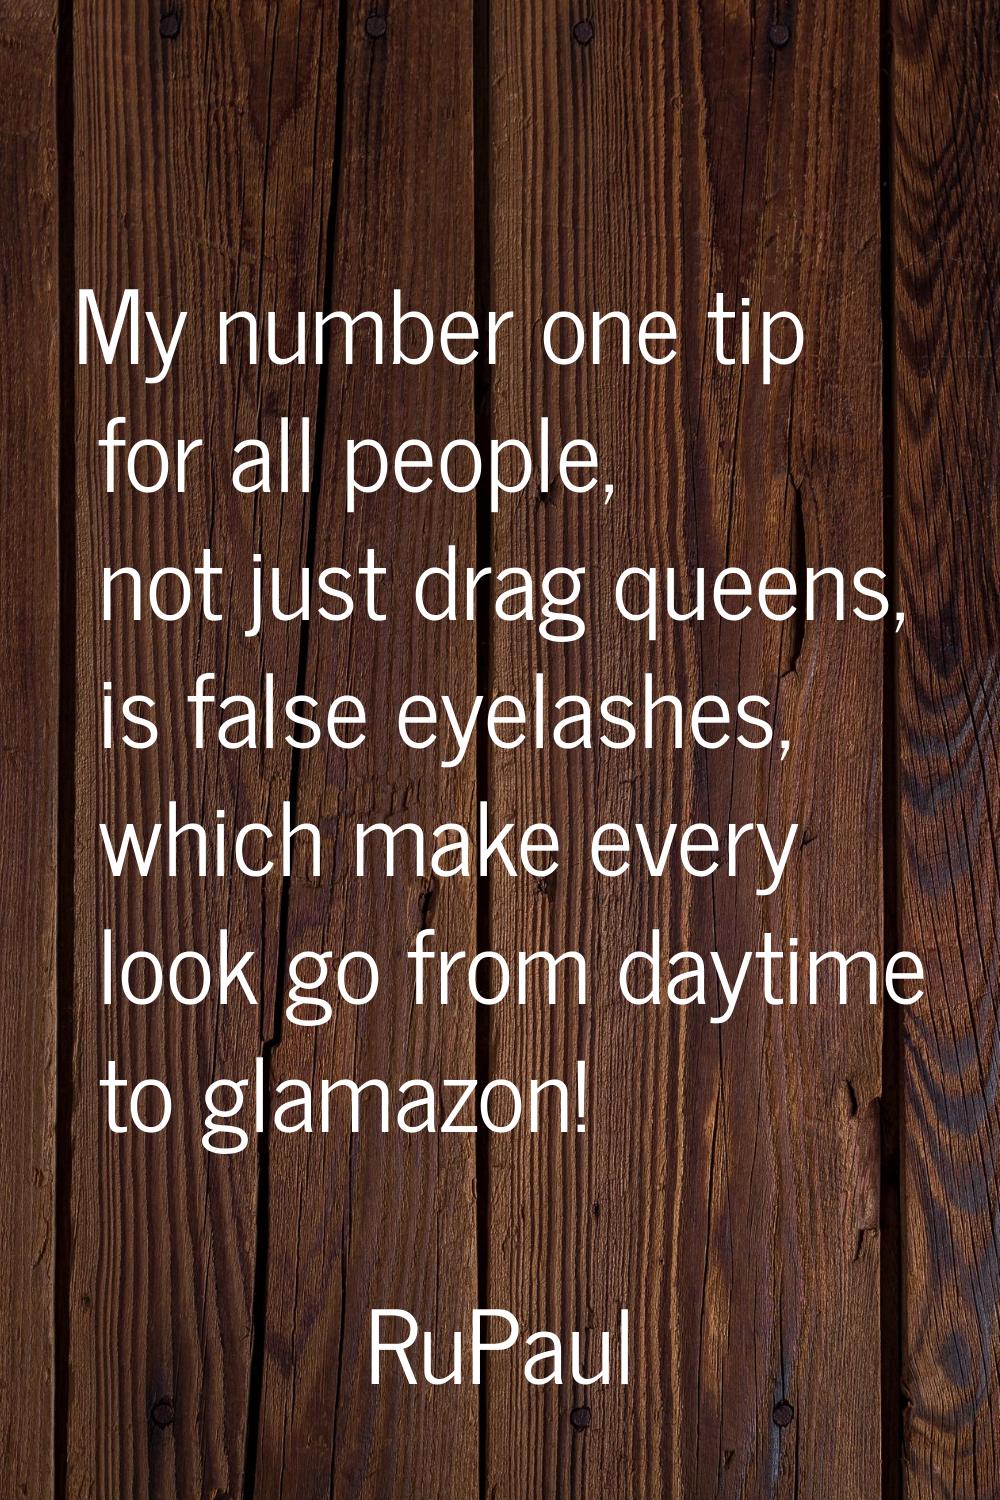 My number one tip for all people, not just drag queens, is false eyelashes, which make every look g